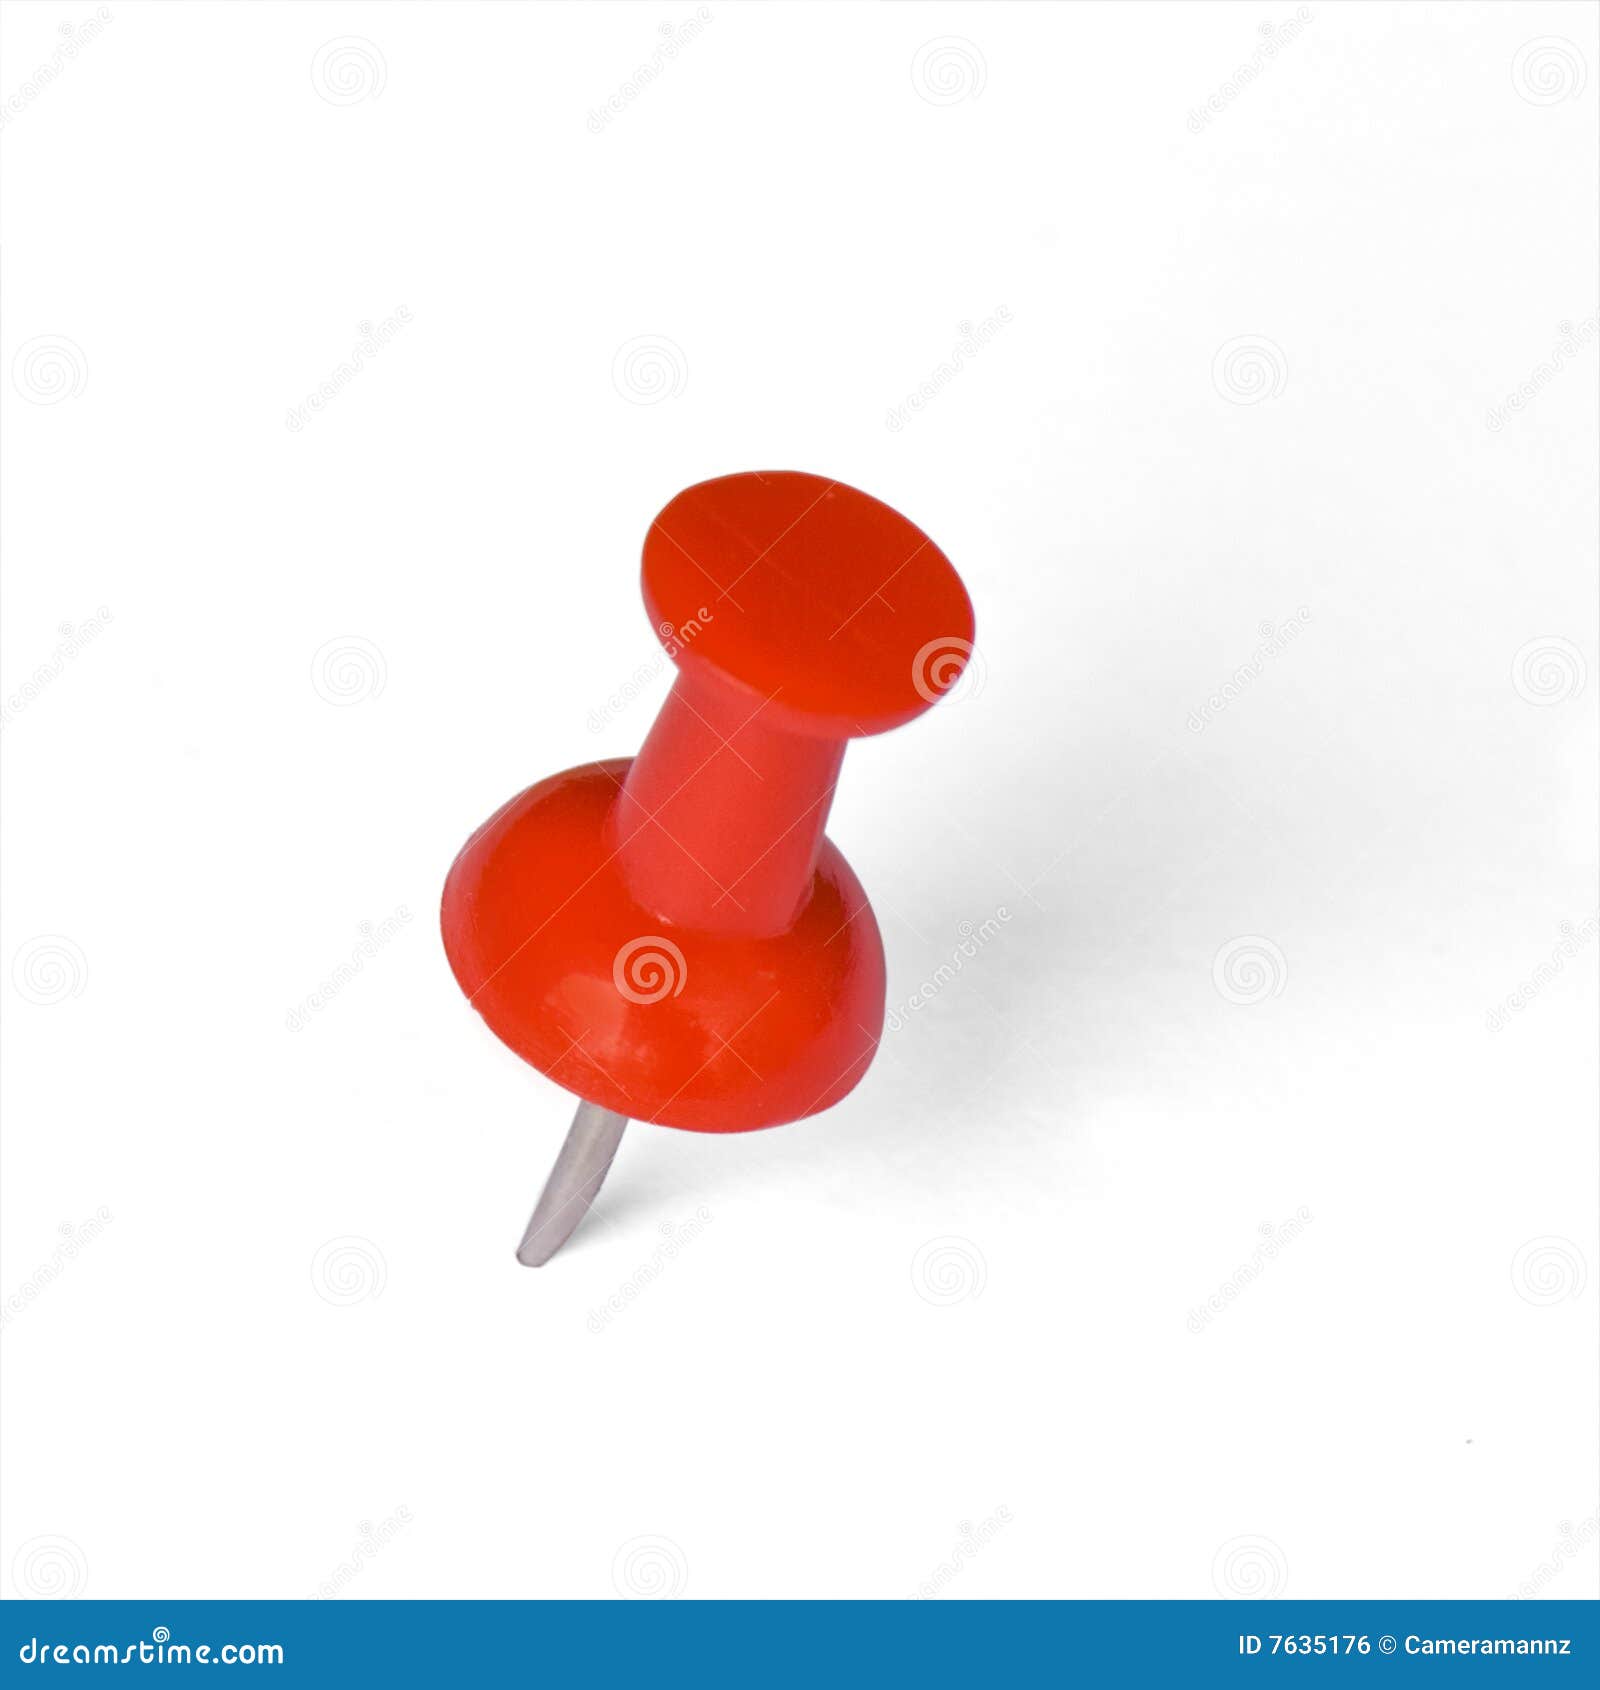 Push pin stock photo. Image of memo, isolated, detail - 7635176